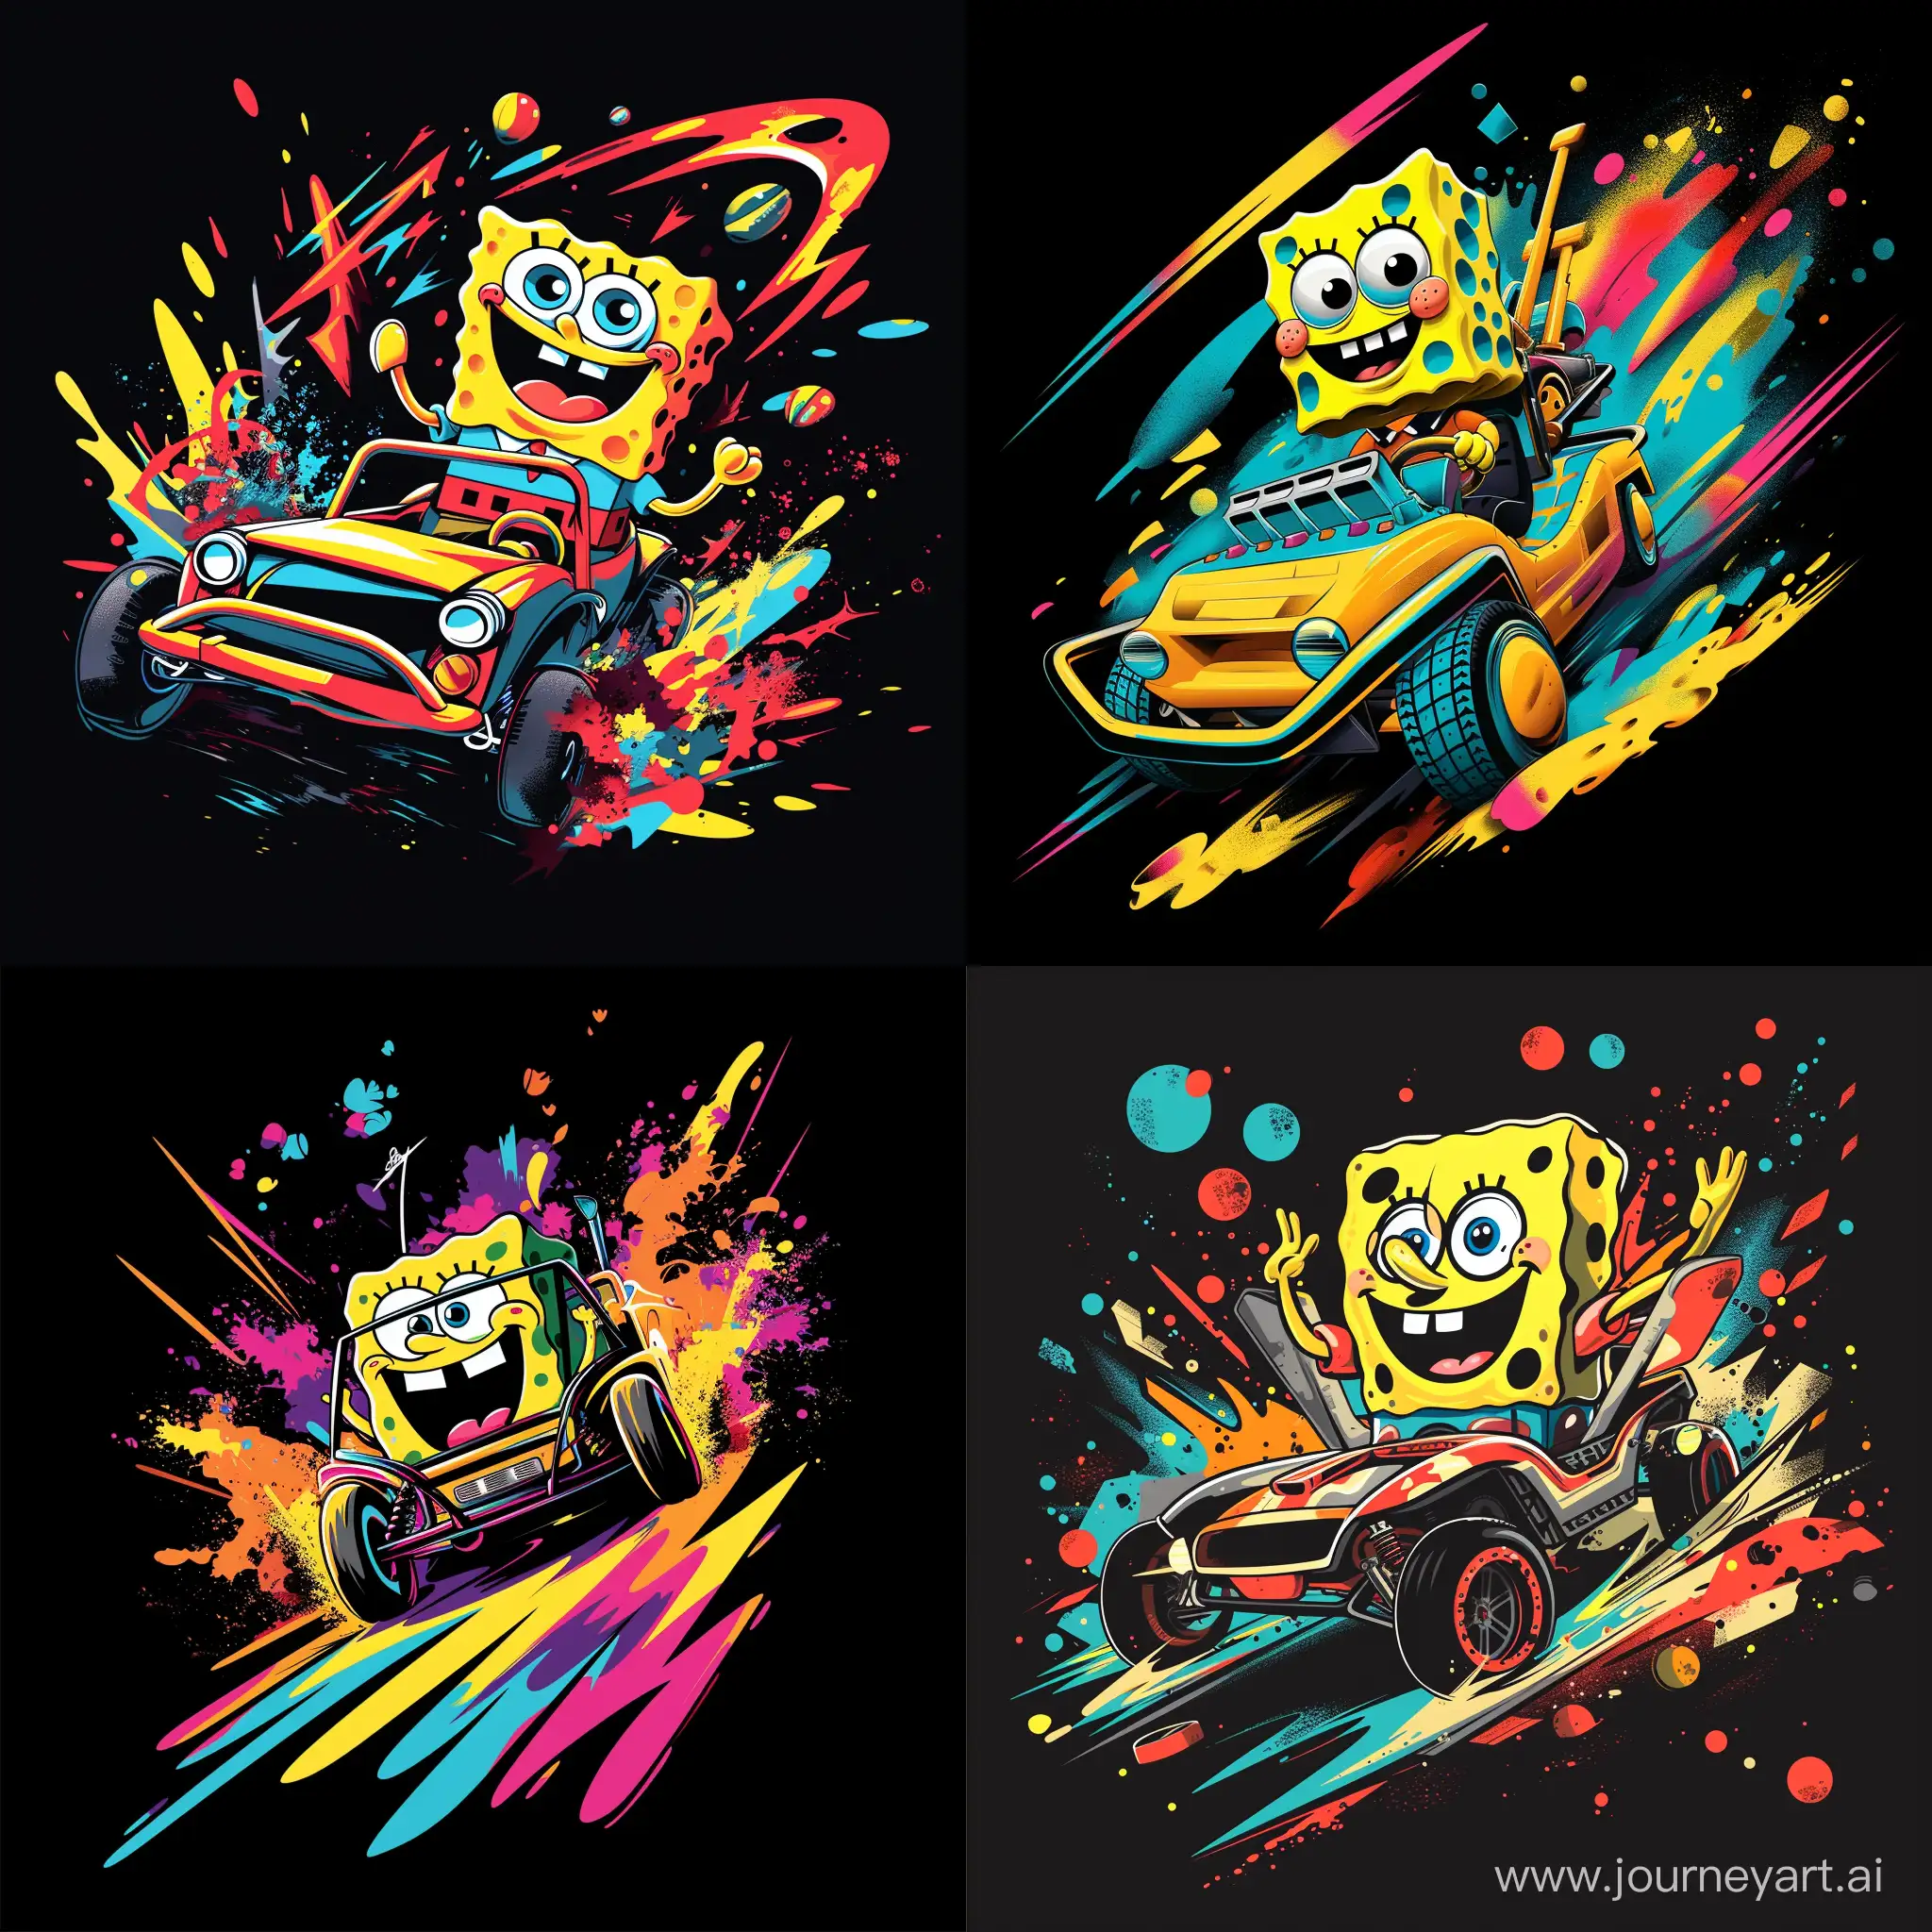 spongebob Emoji driving a dune buggy , tailored for t-shirt art. The design combines 3D vector art with bright, bold, colorful elements against a black background,